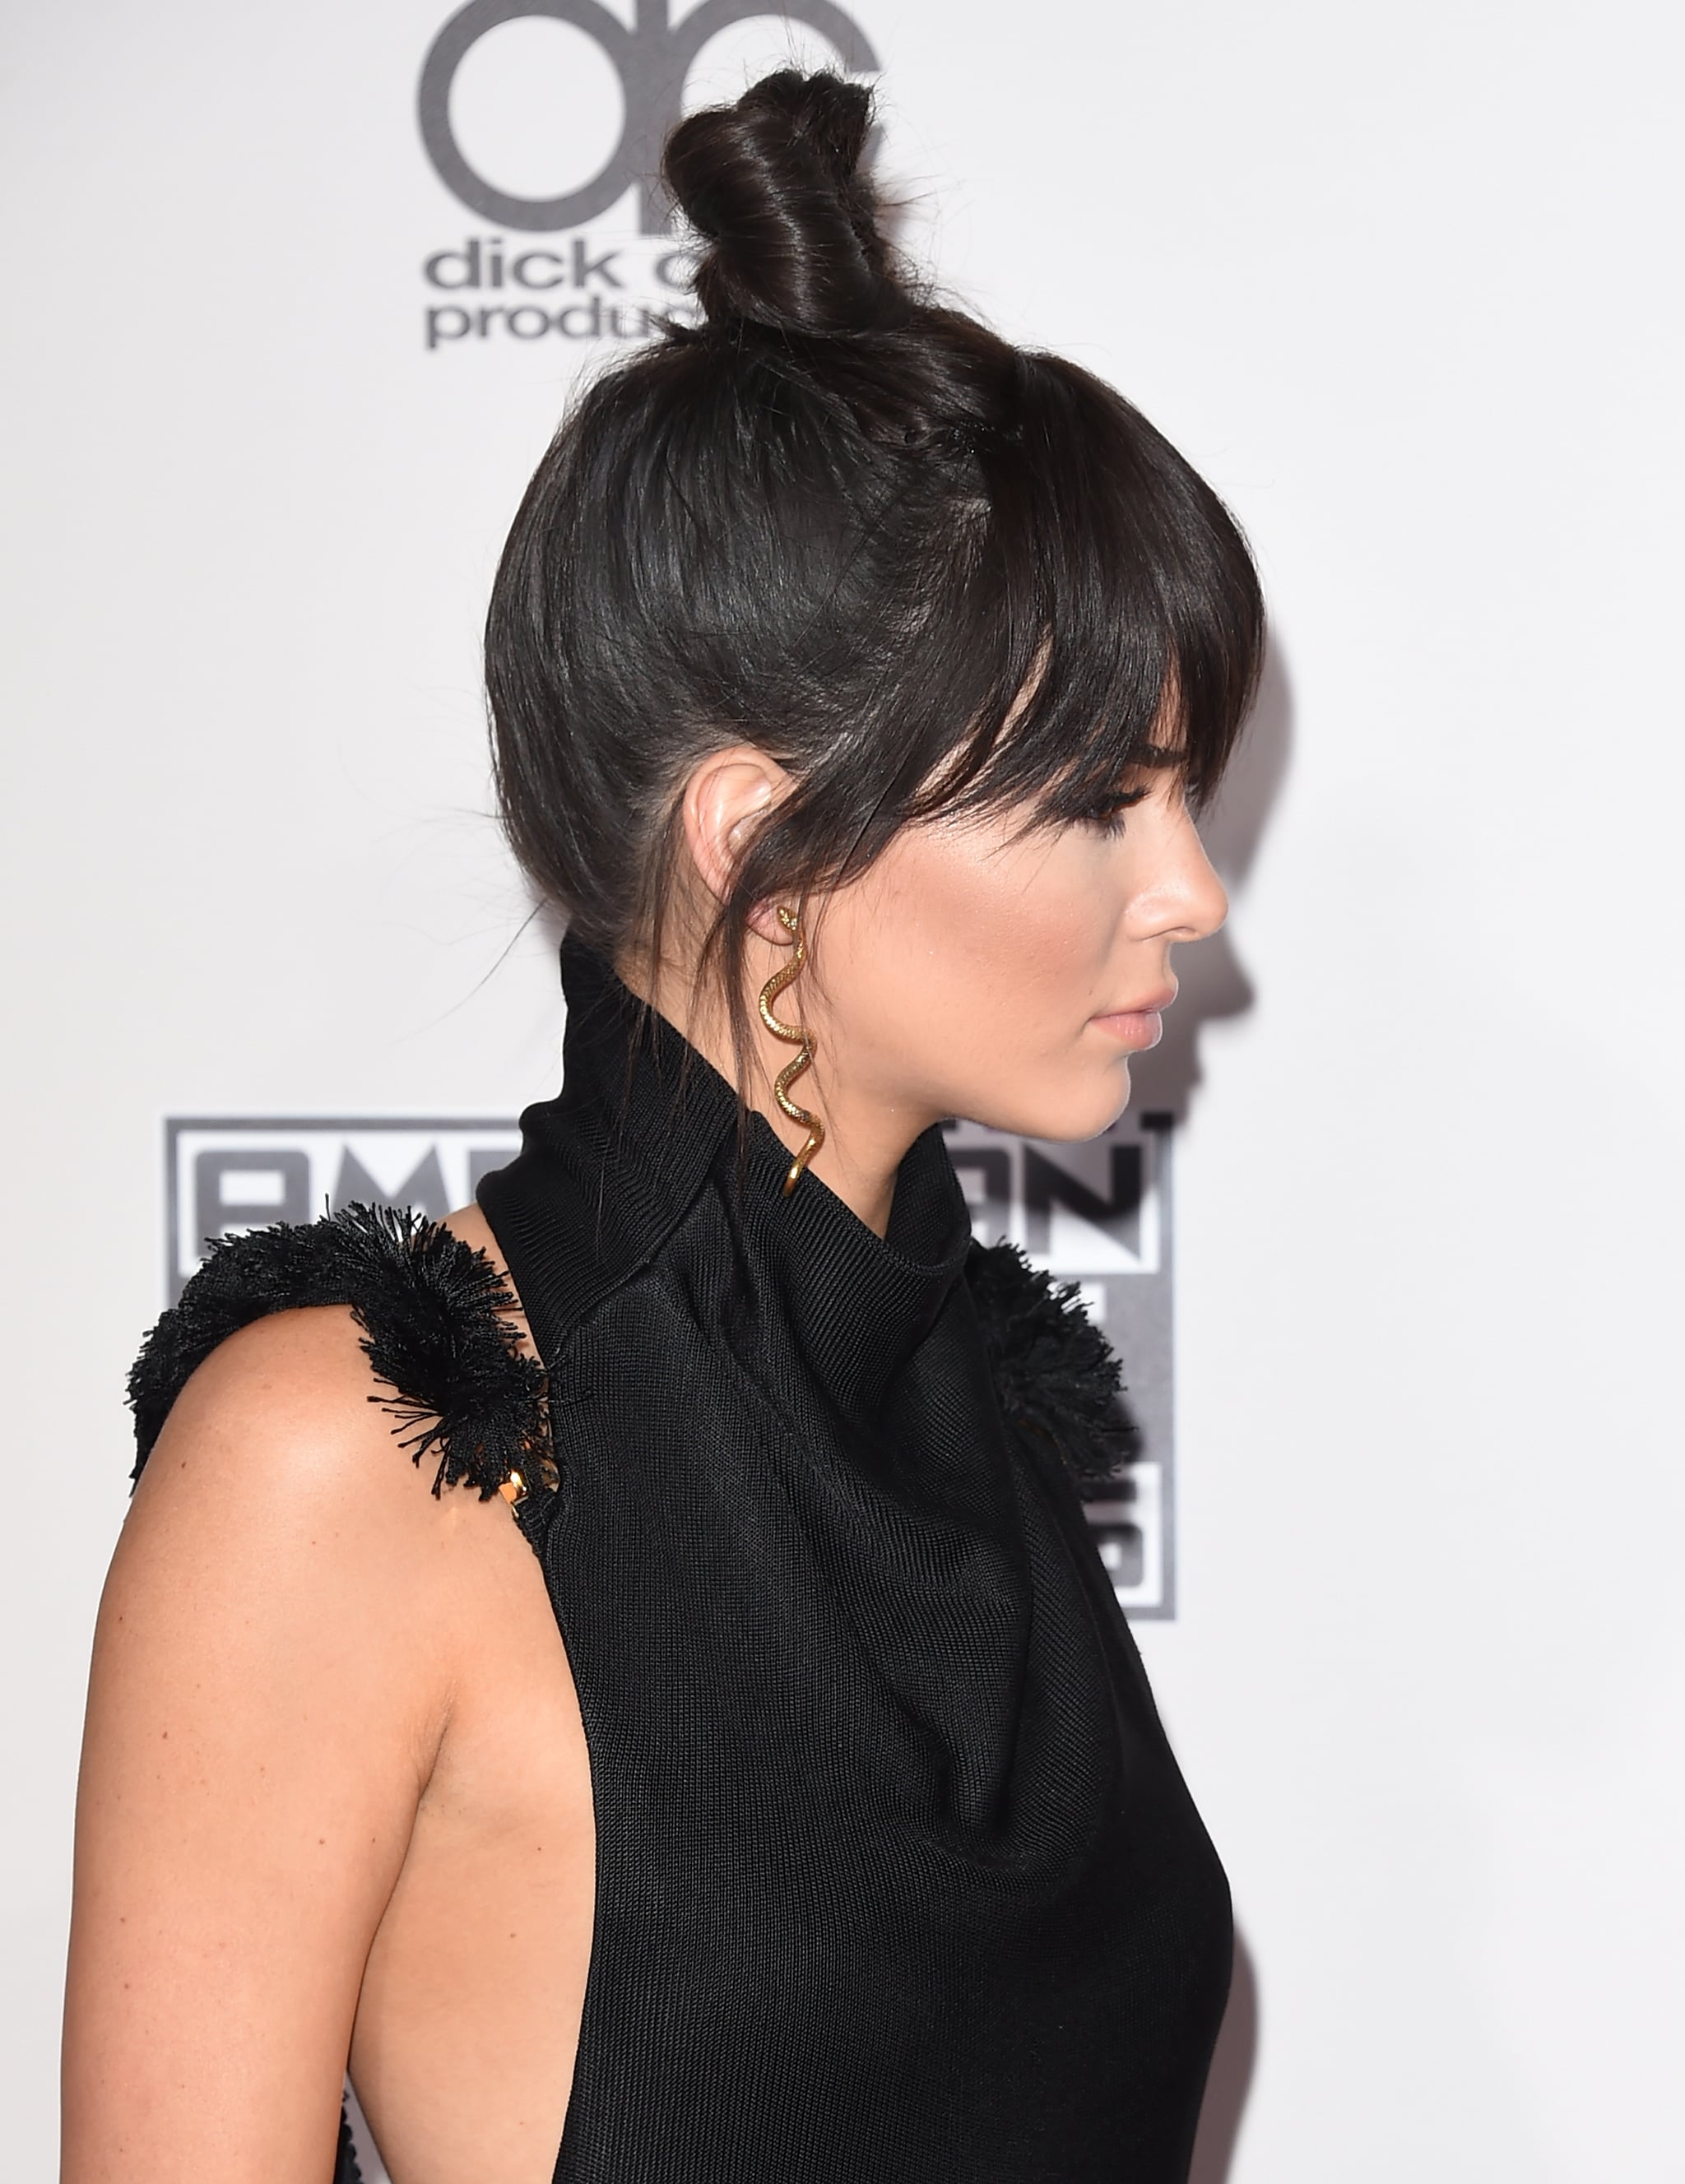 Kendall Jenner With Bangs At The American Music Awards In